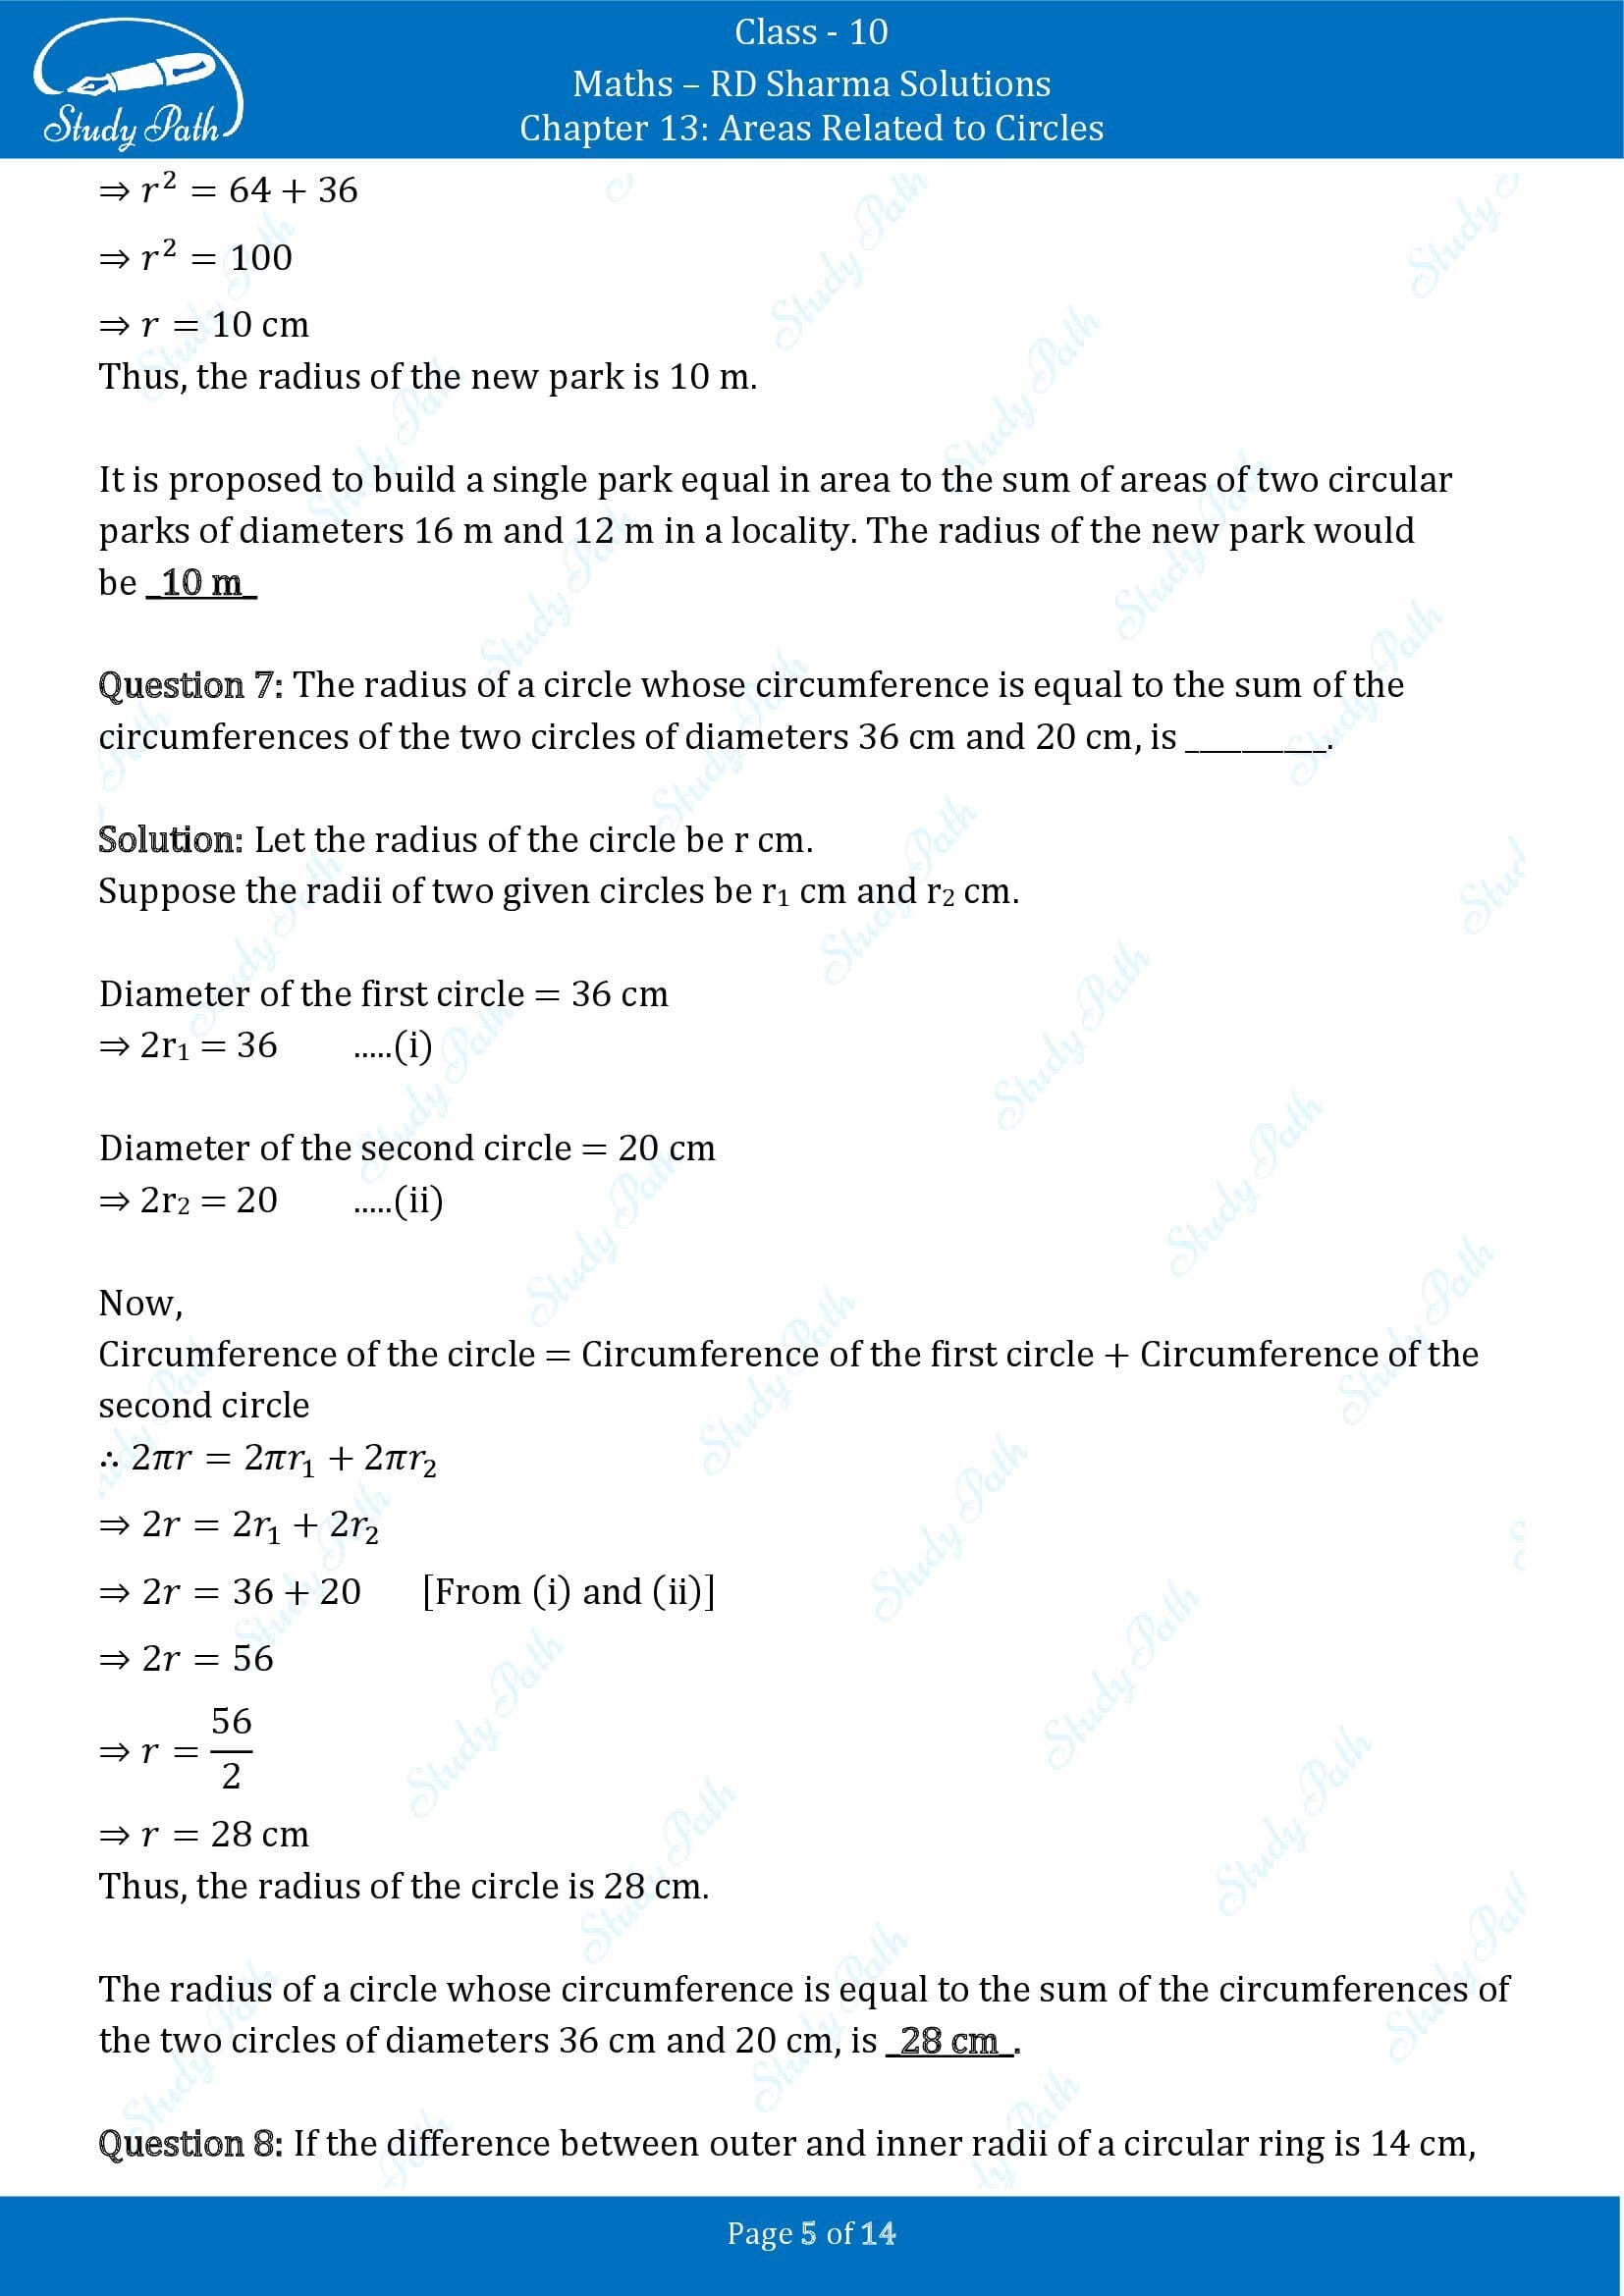 RD Sharma Solutions Class 10 Chapter 13 Areas Related to Circles Fill in the Blank Type Questions FBQs 00005